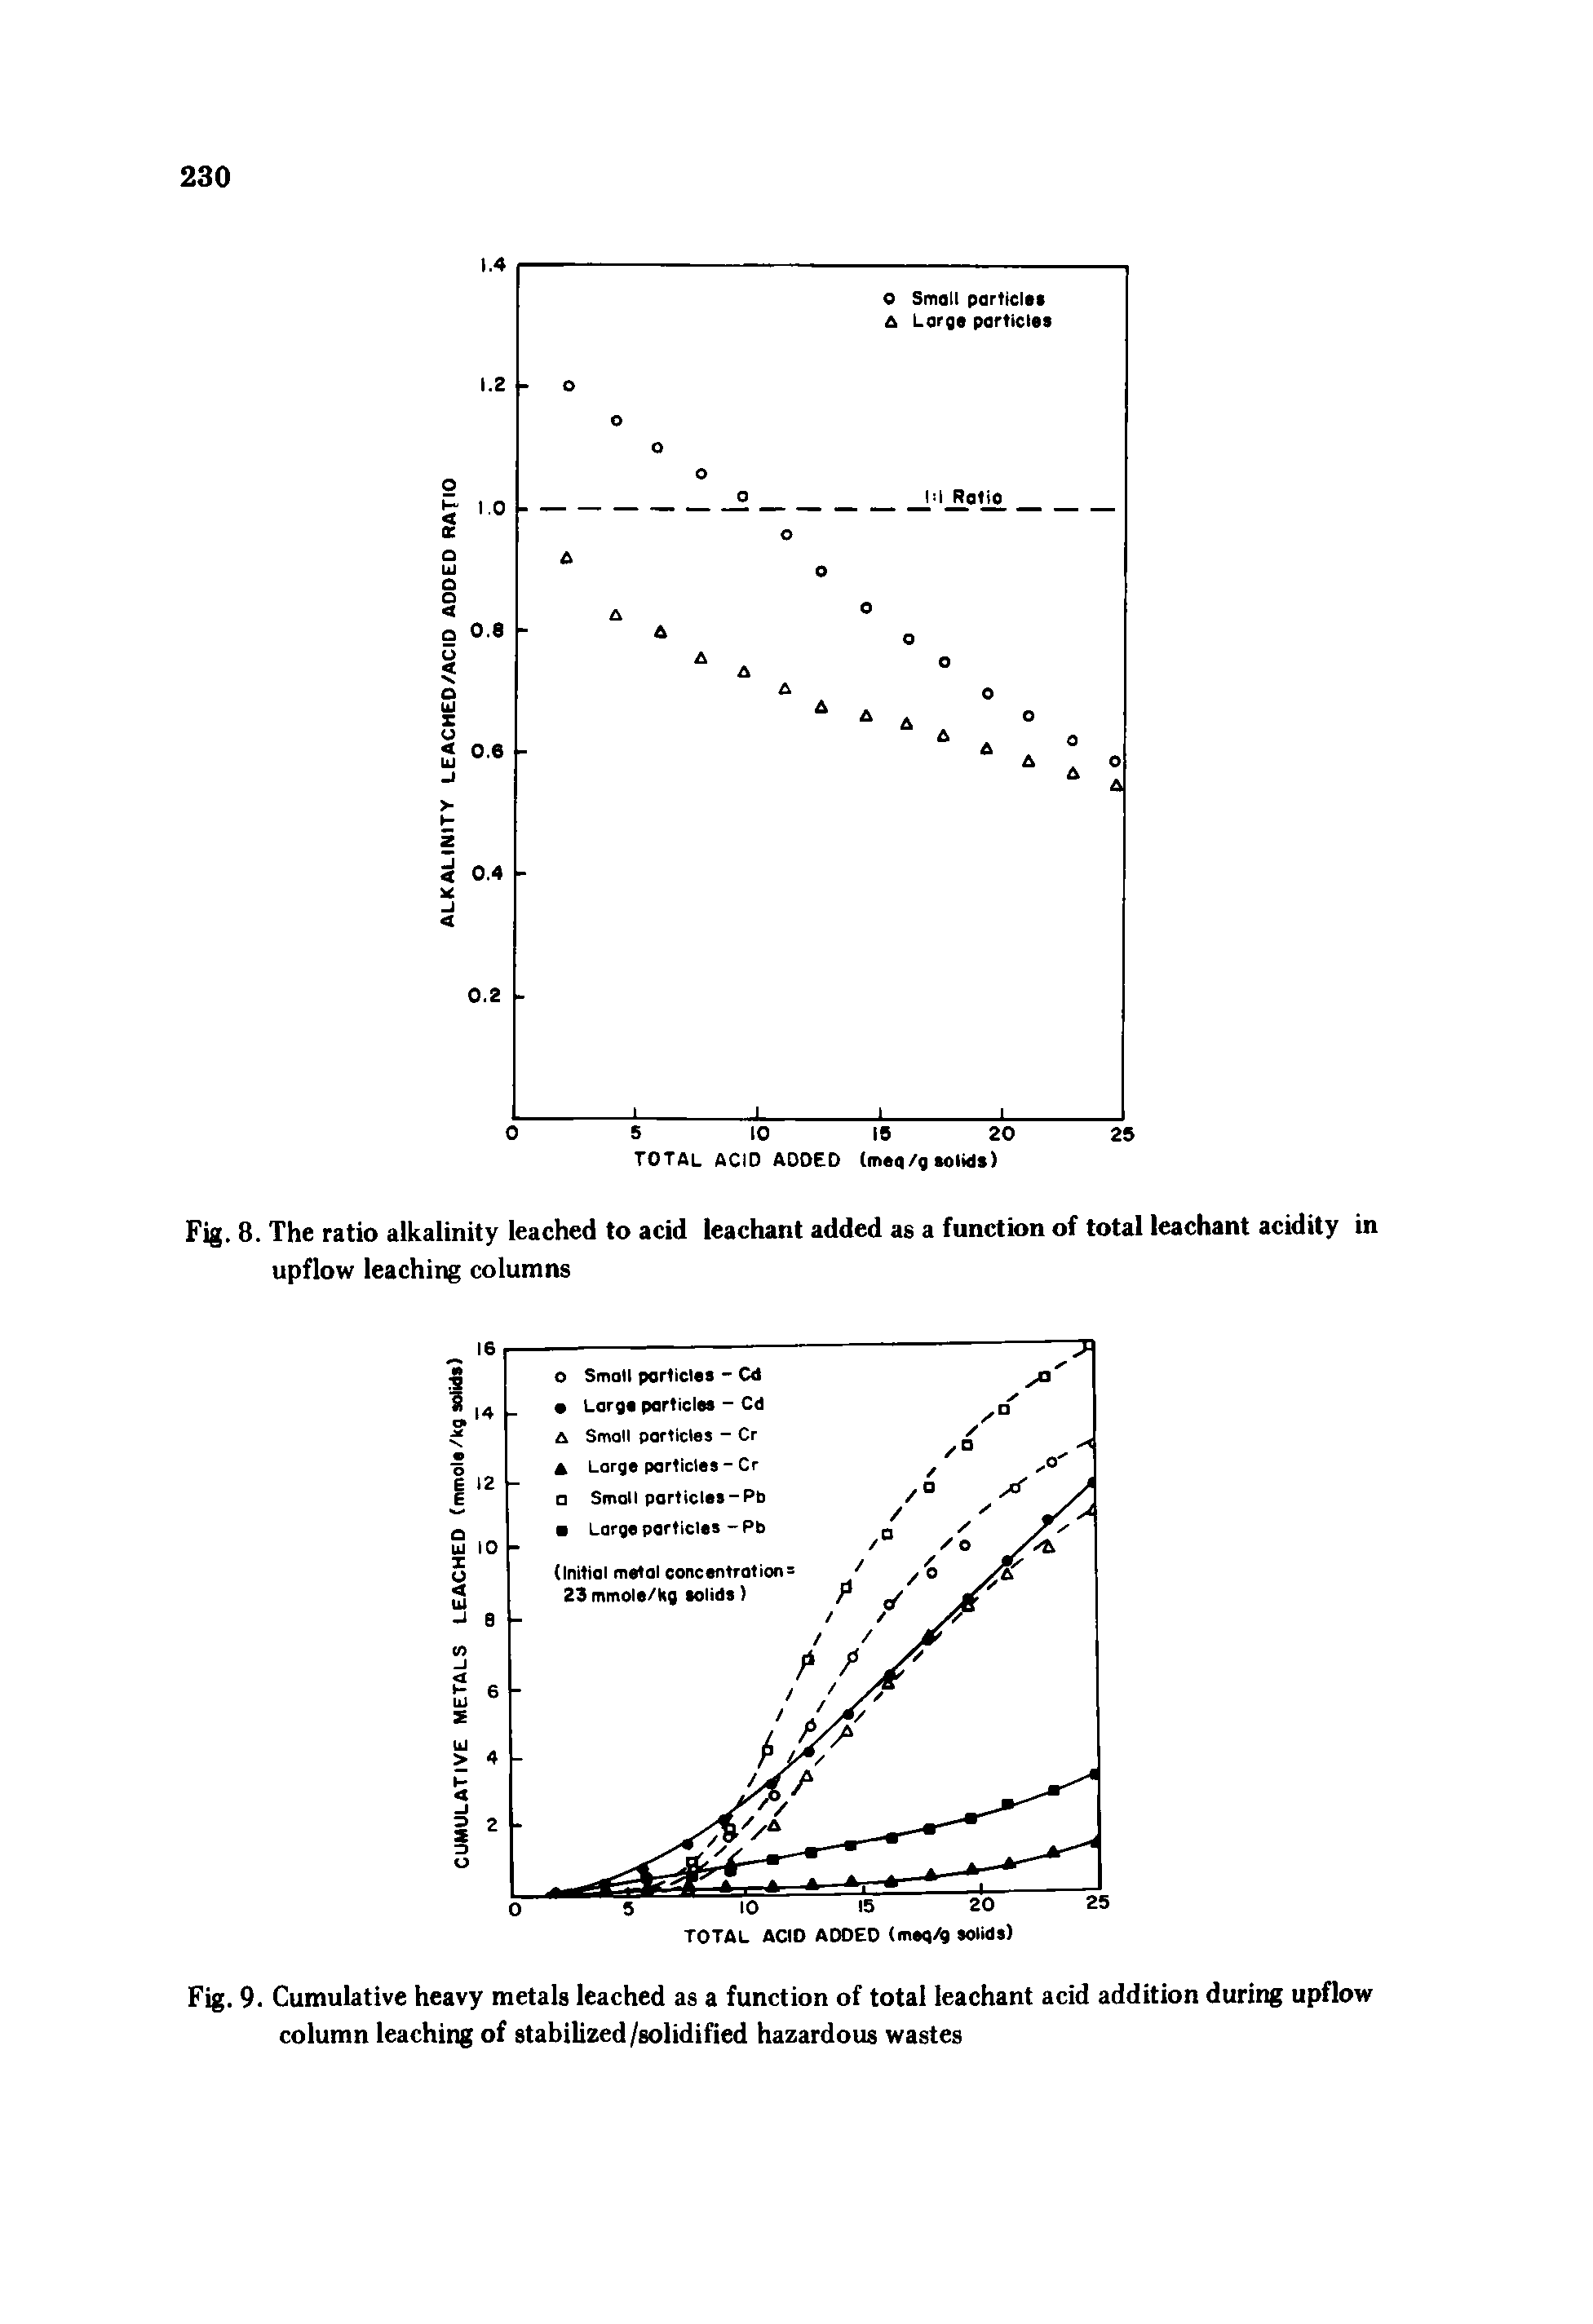 Fig. 8. The ratio alkalinity leached to acid leachant added as a function of total leachant acidity in upflow leaching columns...